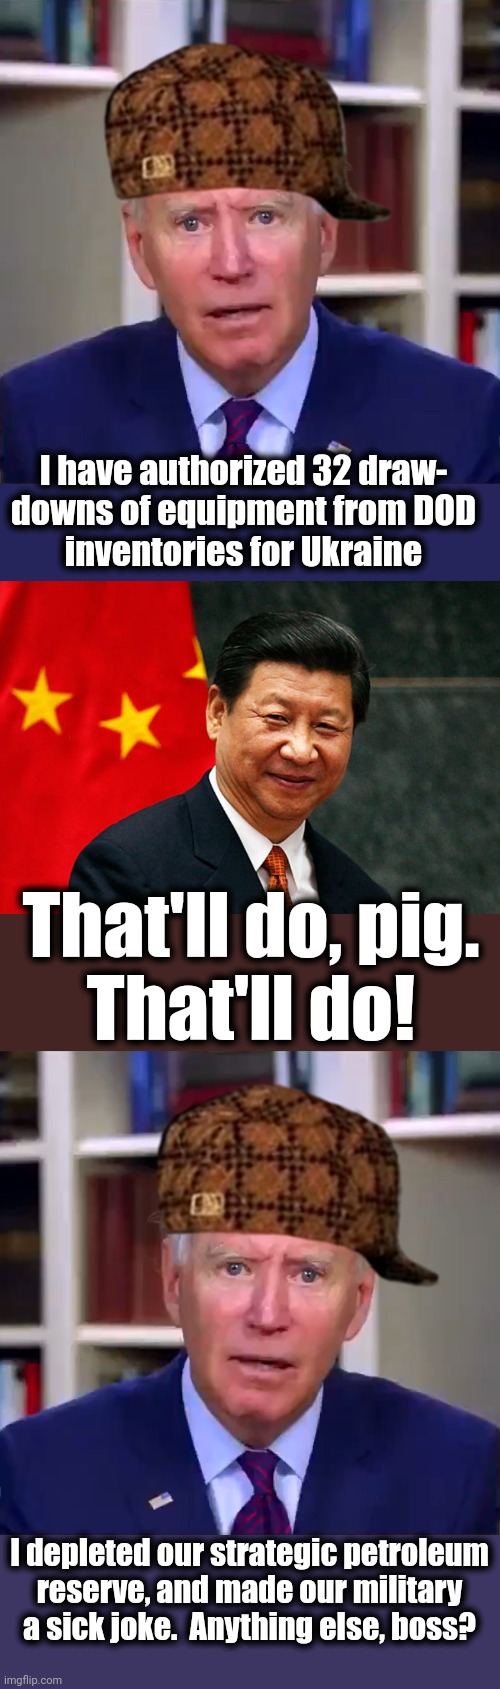 The senile creep gets the United States unready for World War 3 | I have authorized 32 draw-
downs of equipment from DOD
inventories for Ukraine; That'll do, pig.
That'll do! I depleted our strategic petroleum
reserve, and made our military a sick joke.  Anything else, boss? | image tagged in slow joe biden dementia face,xi jinping,world war 3,military,china,ukraine | made w/ Imgflip meme maker